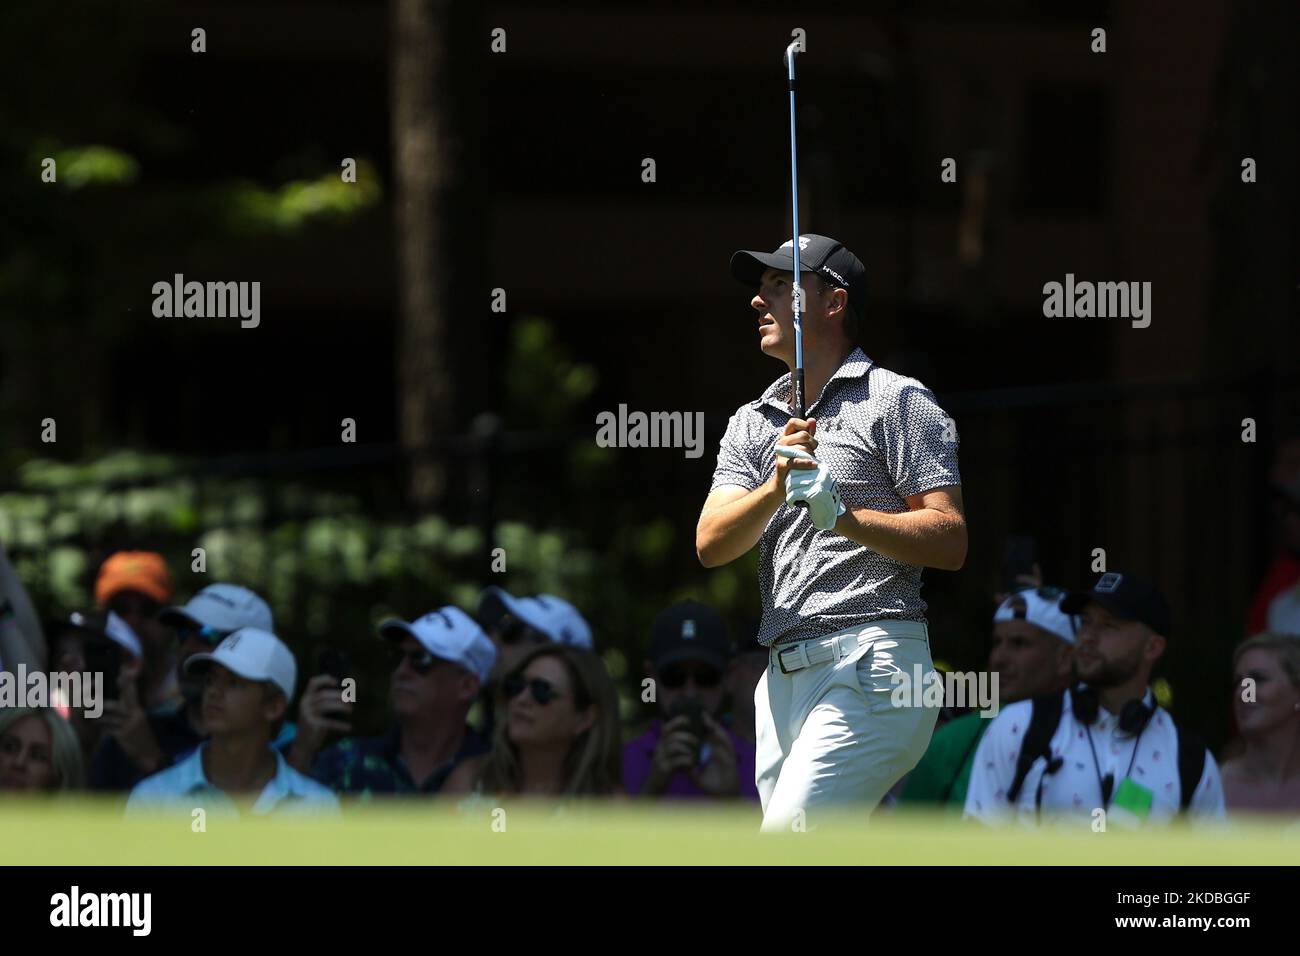 Jordan Spieth of the USA hits out of the rough toward the 9th green during the second round of The Memorial Tournament presented by Workday at Muirfield Village Golf Club in Dublin, Ohio, USA on Friday, June 3, 2022. (Photo by Jorge Lemus/NurPhoto) Stock Photo